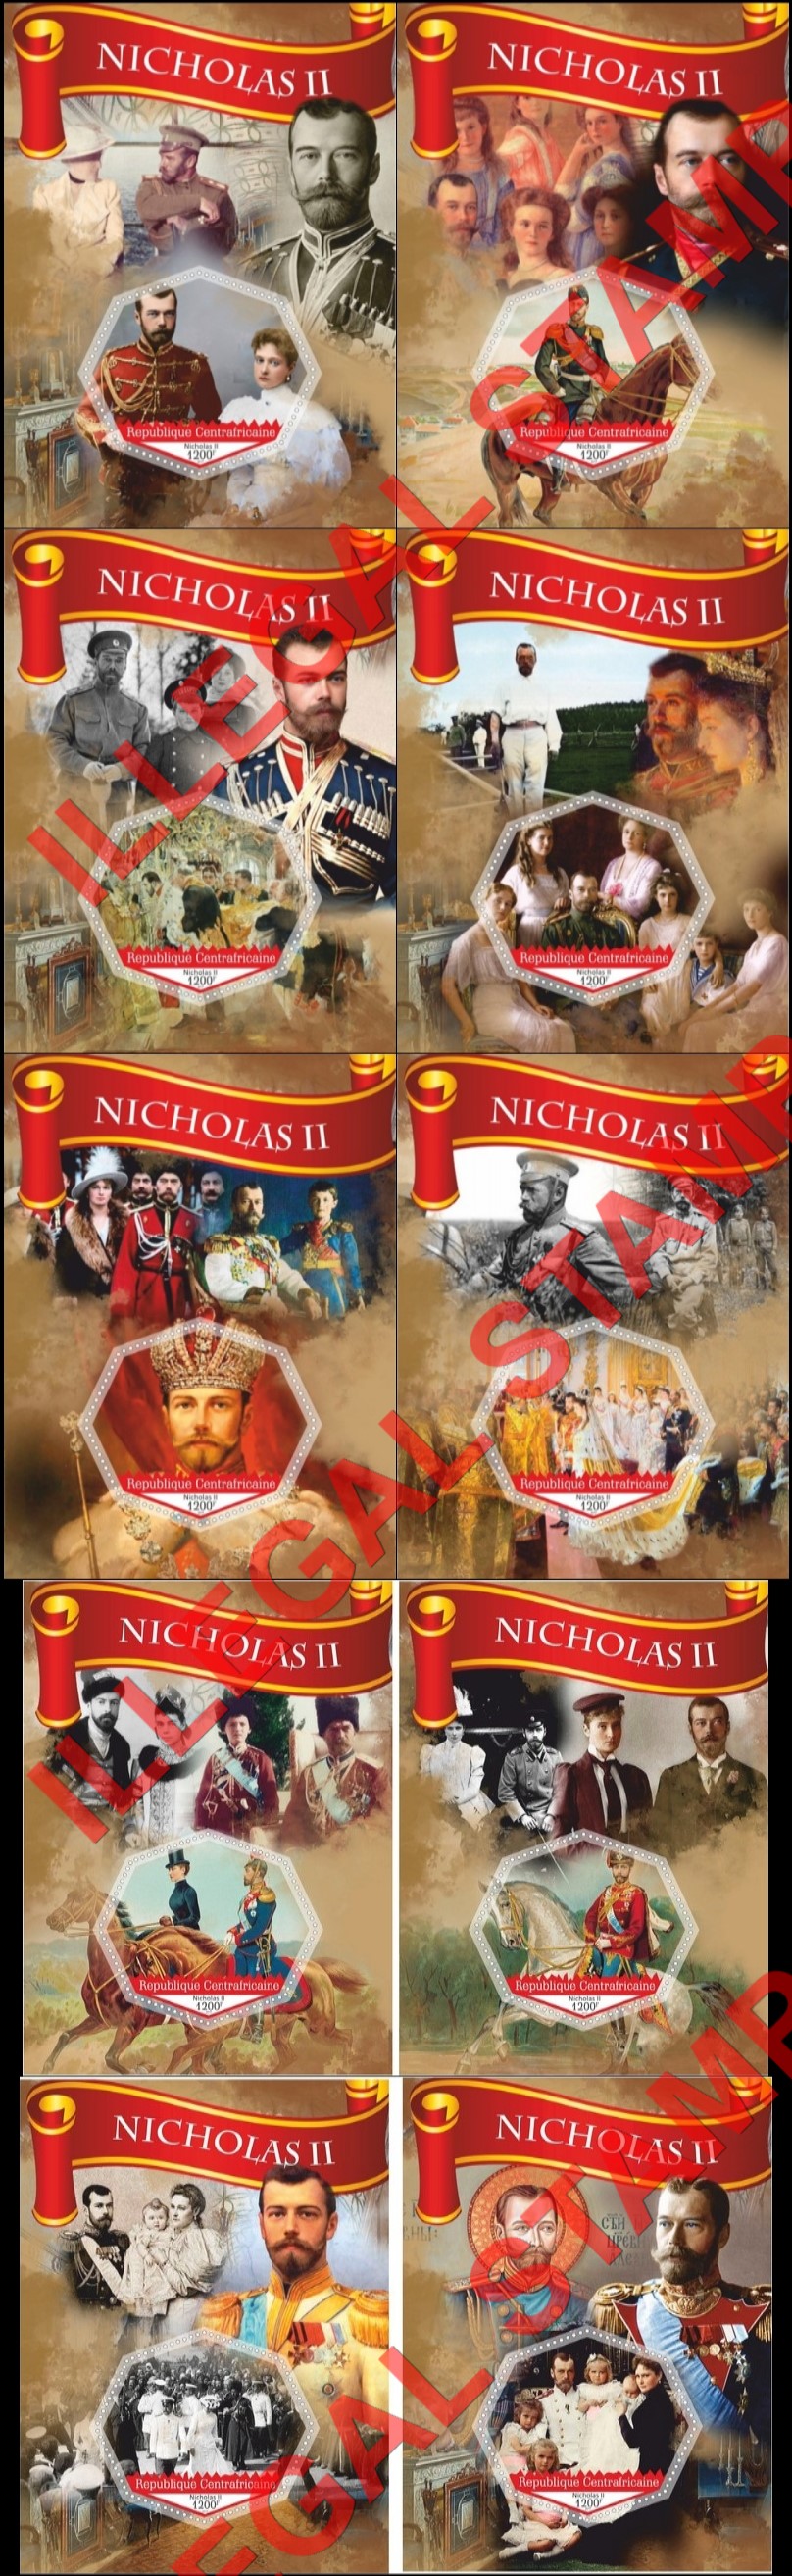 Central African Republic 2017 Nicholas II Illegal Stamp Souvenir Sheets of 1